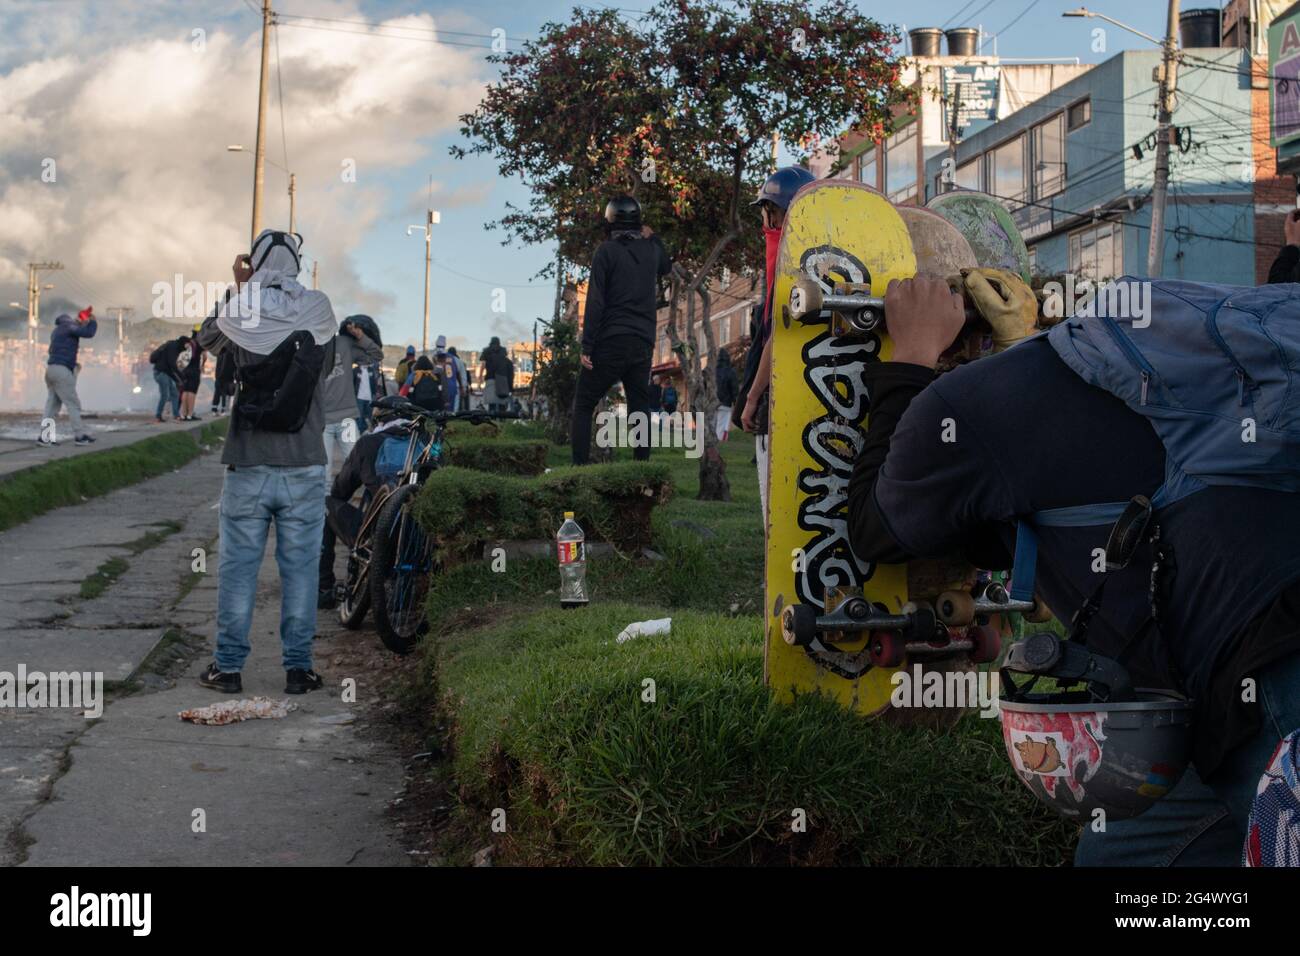 Bogota, Colombia. 21st June, 2021. Demonstrators take cover behind skateboards as clashes between demonstratros and Colombia's riot police erupt anti-government protest raise in Bogota Colombia against the government of president Ivan Duque, inequalities and abuse of authority by police. Credit: Long Visual Press/Alamy Live News Stock Photo